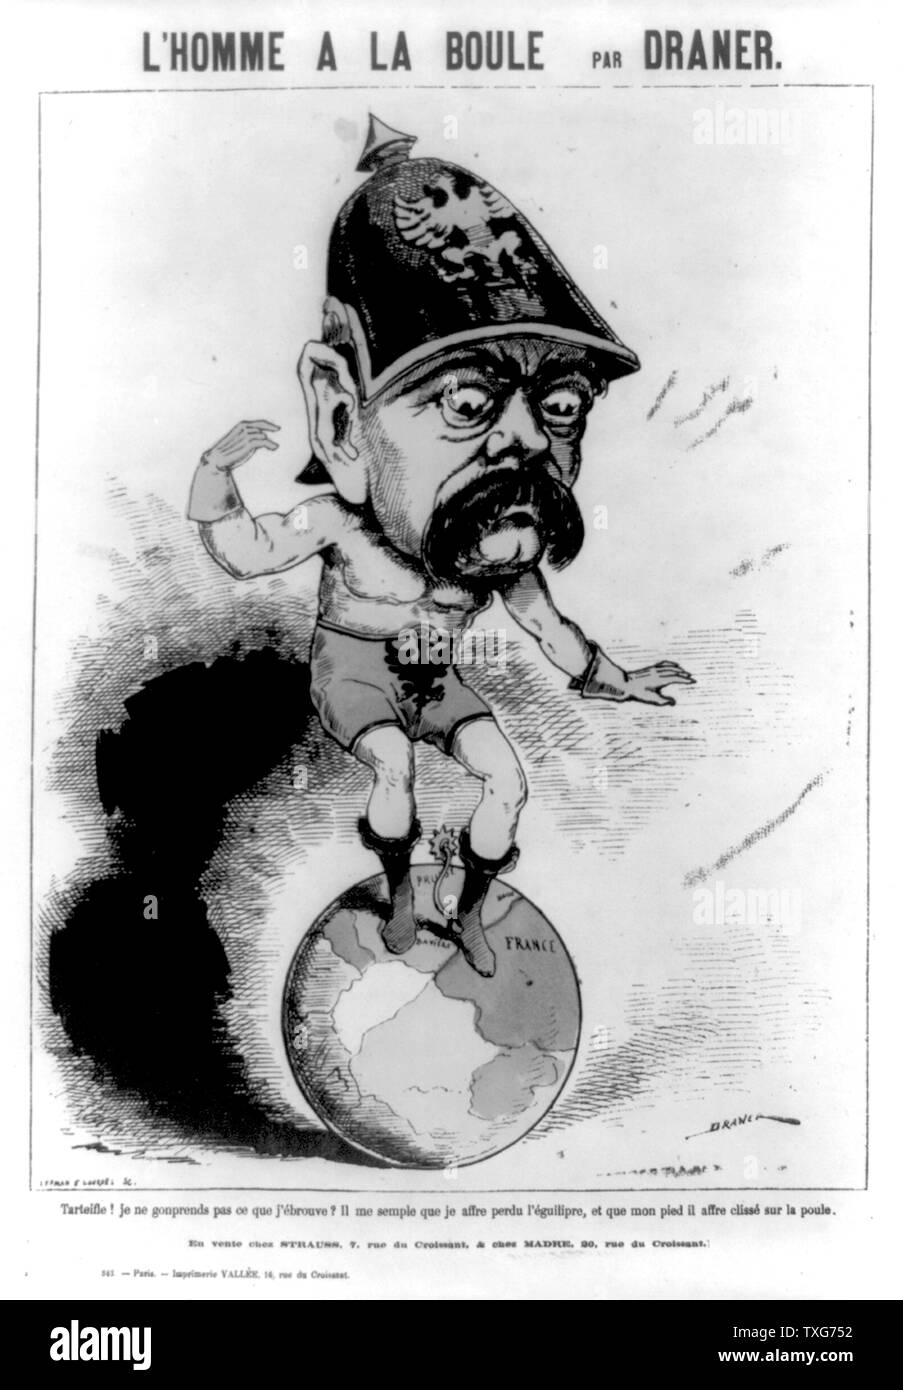 The Man on the Ball : Cartoon of Otto von Bismarck, Prussian statesman, having difficulty balancing on the world - his left foot is on France French cartoon published during the Franco-Prussian War (1870-1871) Stock Photo